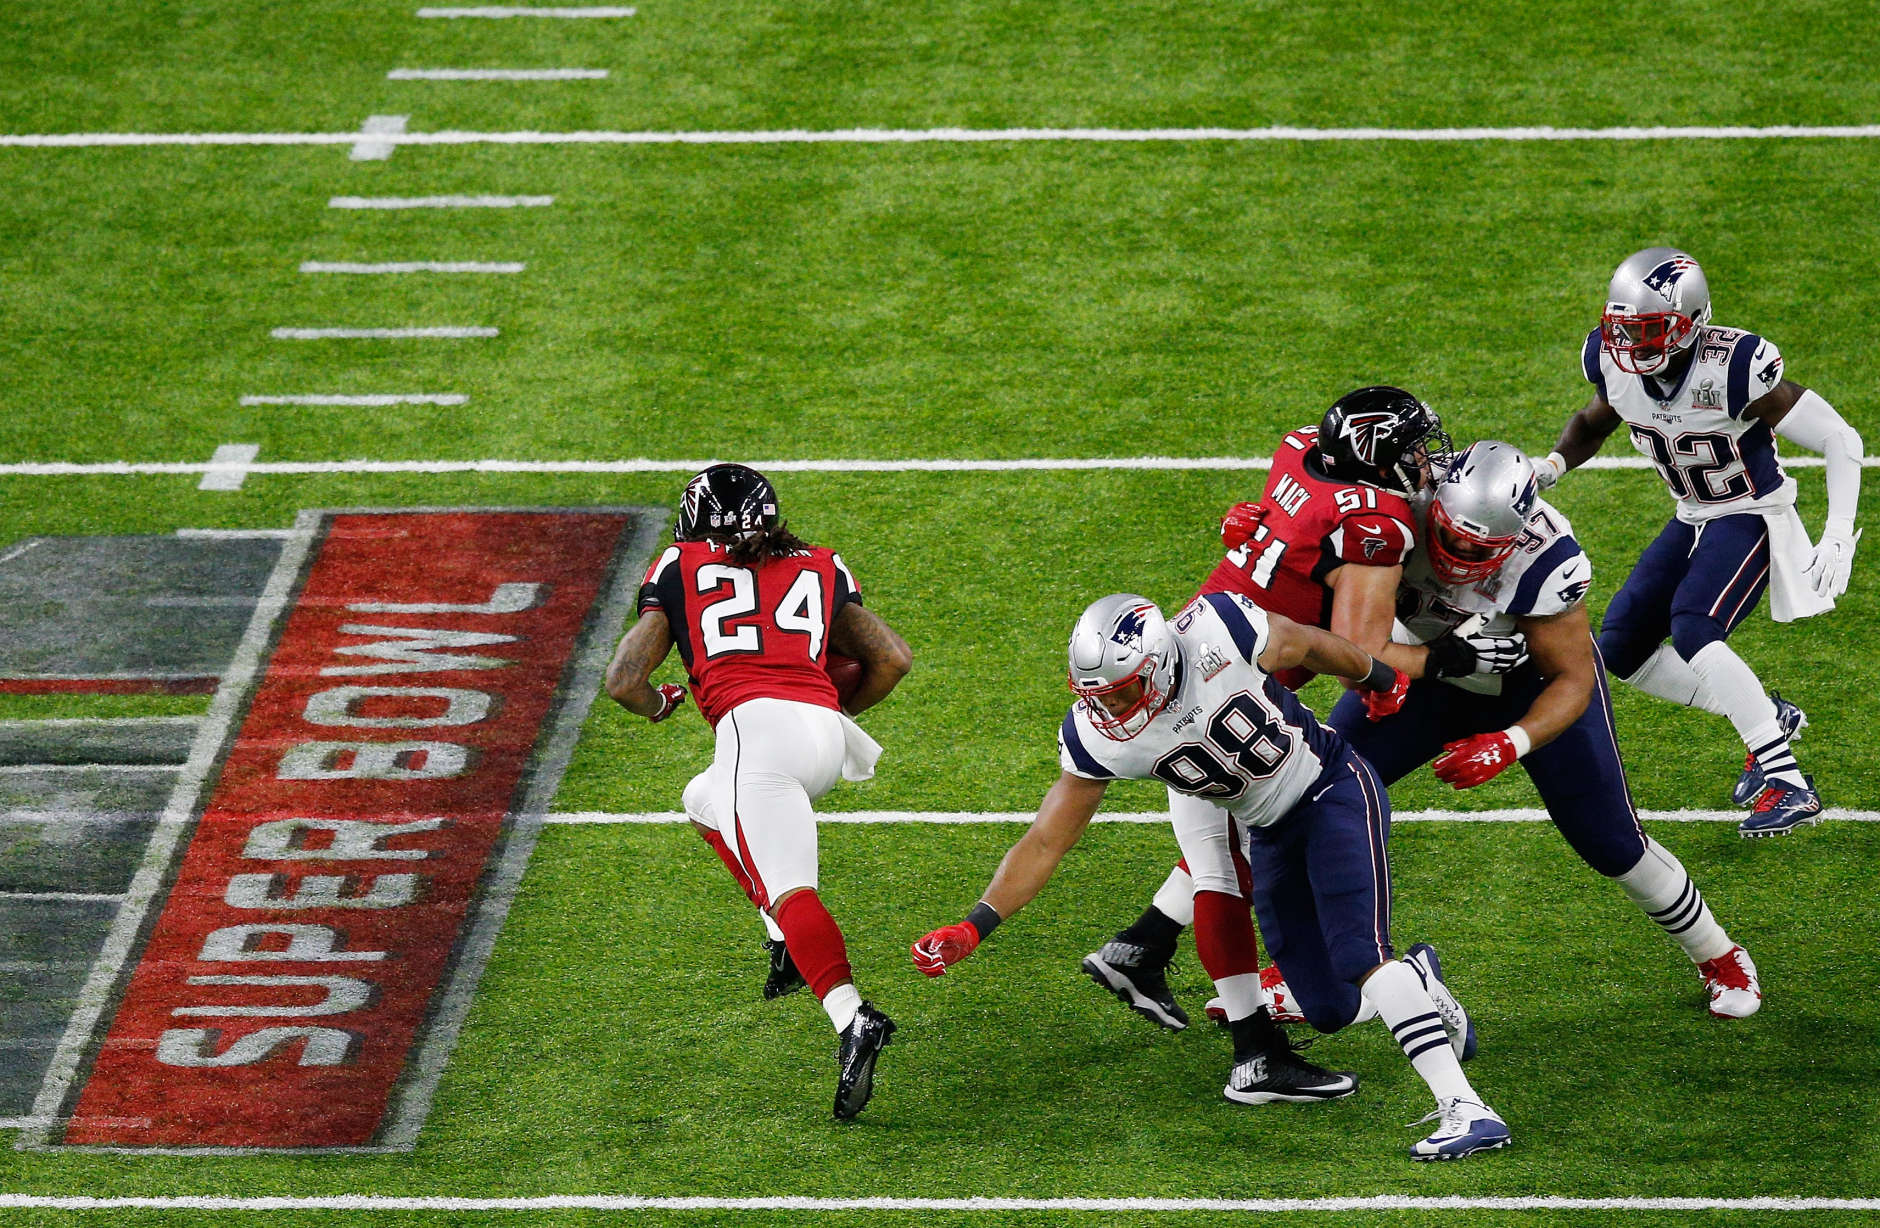 HOUSTON, TX - FEBRUARY 05:  Devonta Freeman #24 of the Atlanta Falcons runs past Martellus Bennett #88 of the New England Patriots in the first half during Super Bowl 51 at NRG Stadium on February 5, 2017 in Houston, Texas.  (Photo by Bob Levey/Getty Images)